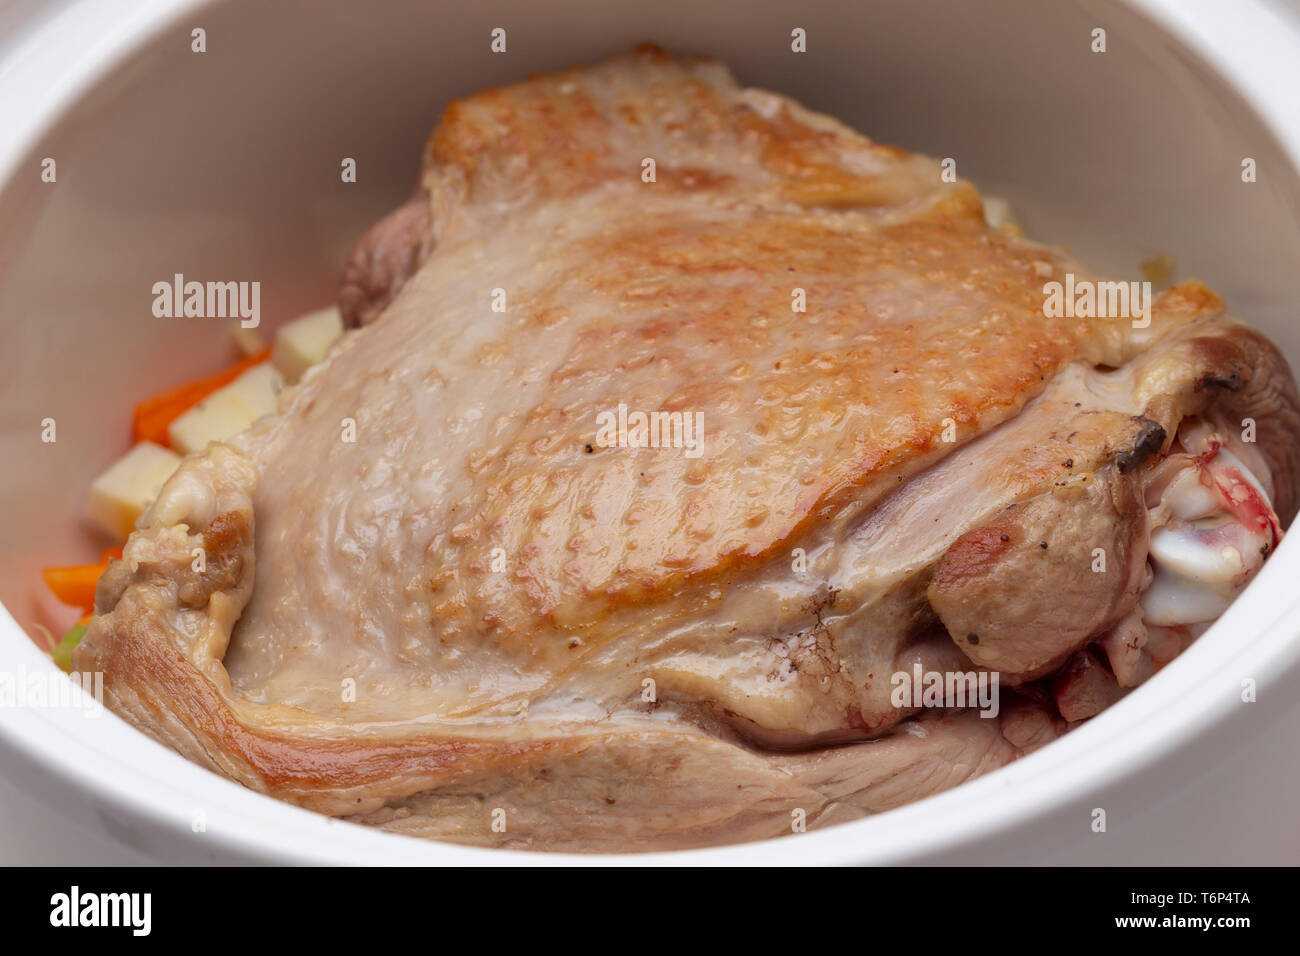 Turkey thigh in a casserole dish with vegertables and provencal herbs, the sking browned ready for braising. Stock Photo